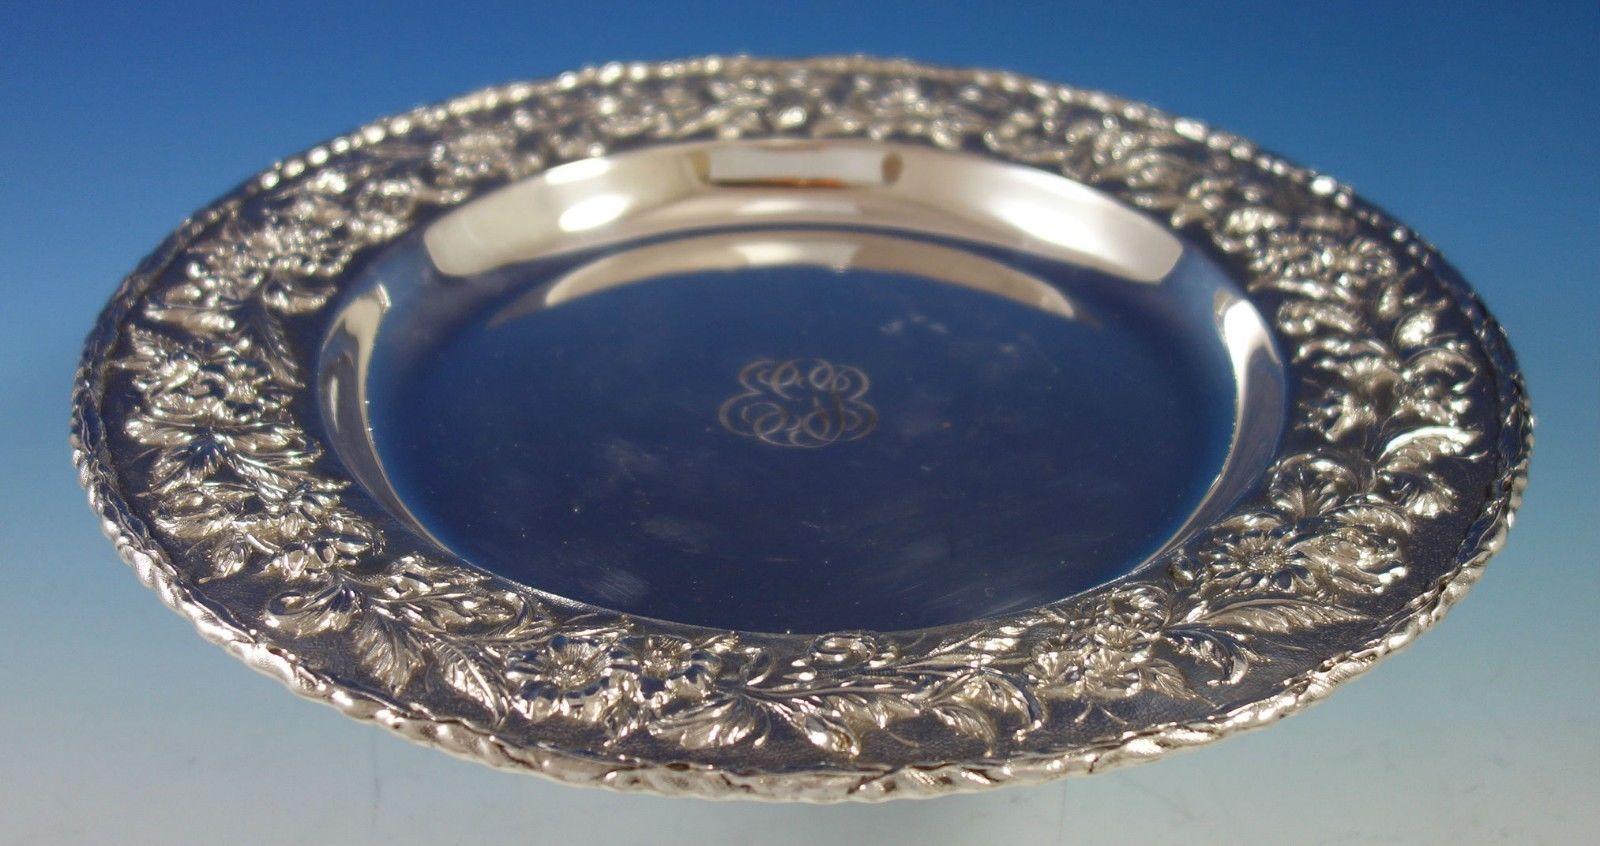 Repousse by Kirk sterling silver round shallow serving platter / tray. The piece is hand decorated, and it has a wide band of flowers and leaves in excellent repousse design. The piece is marked #2503, it measures 13 in diameter x 1 , and weighs